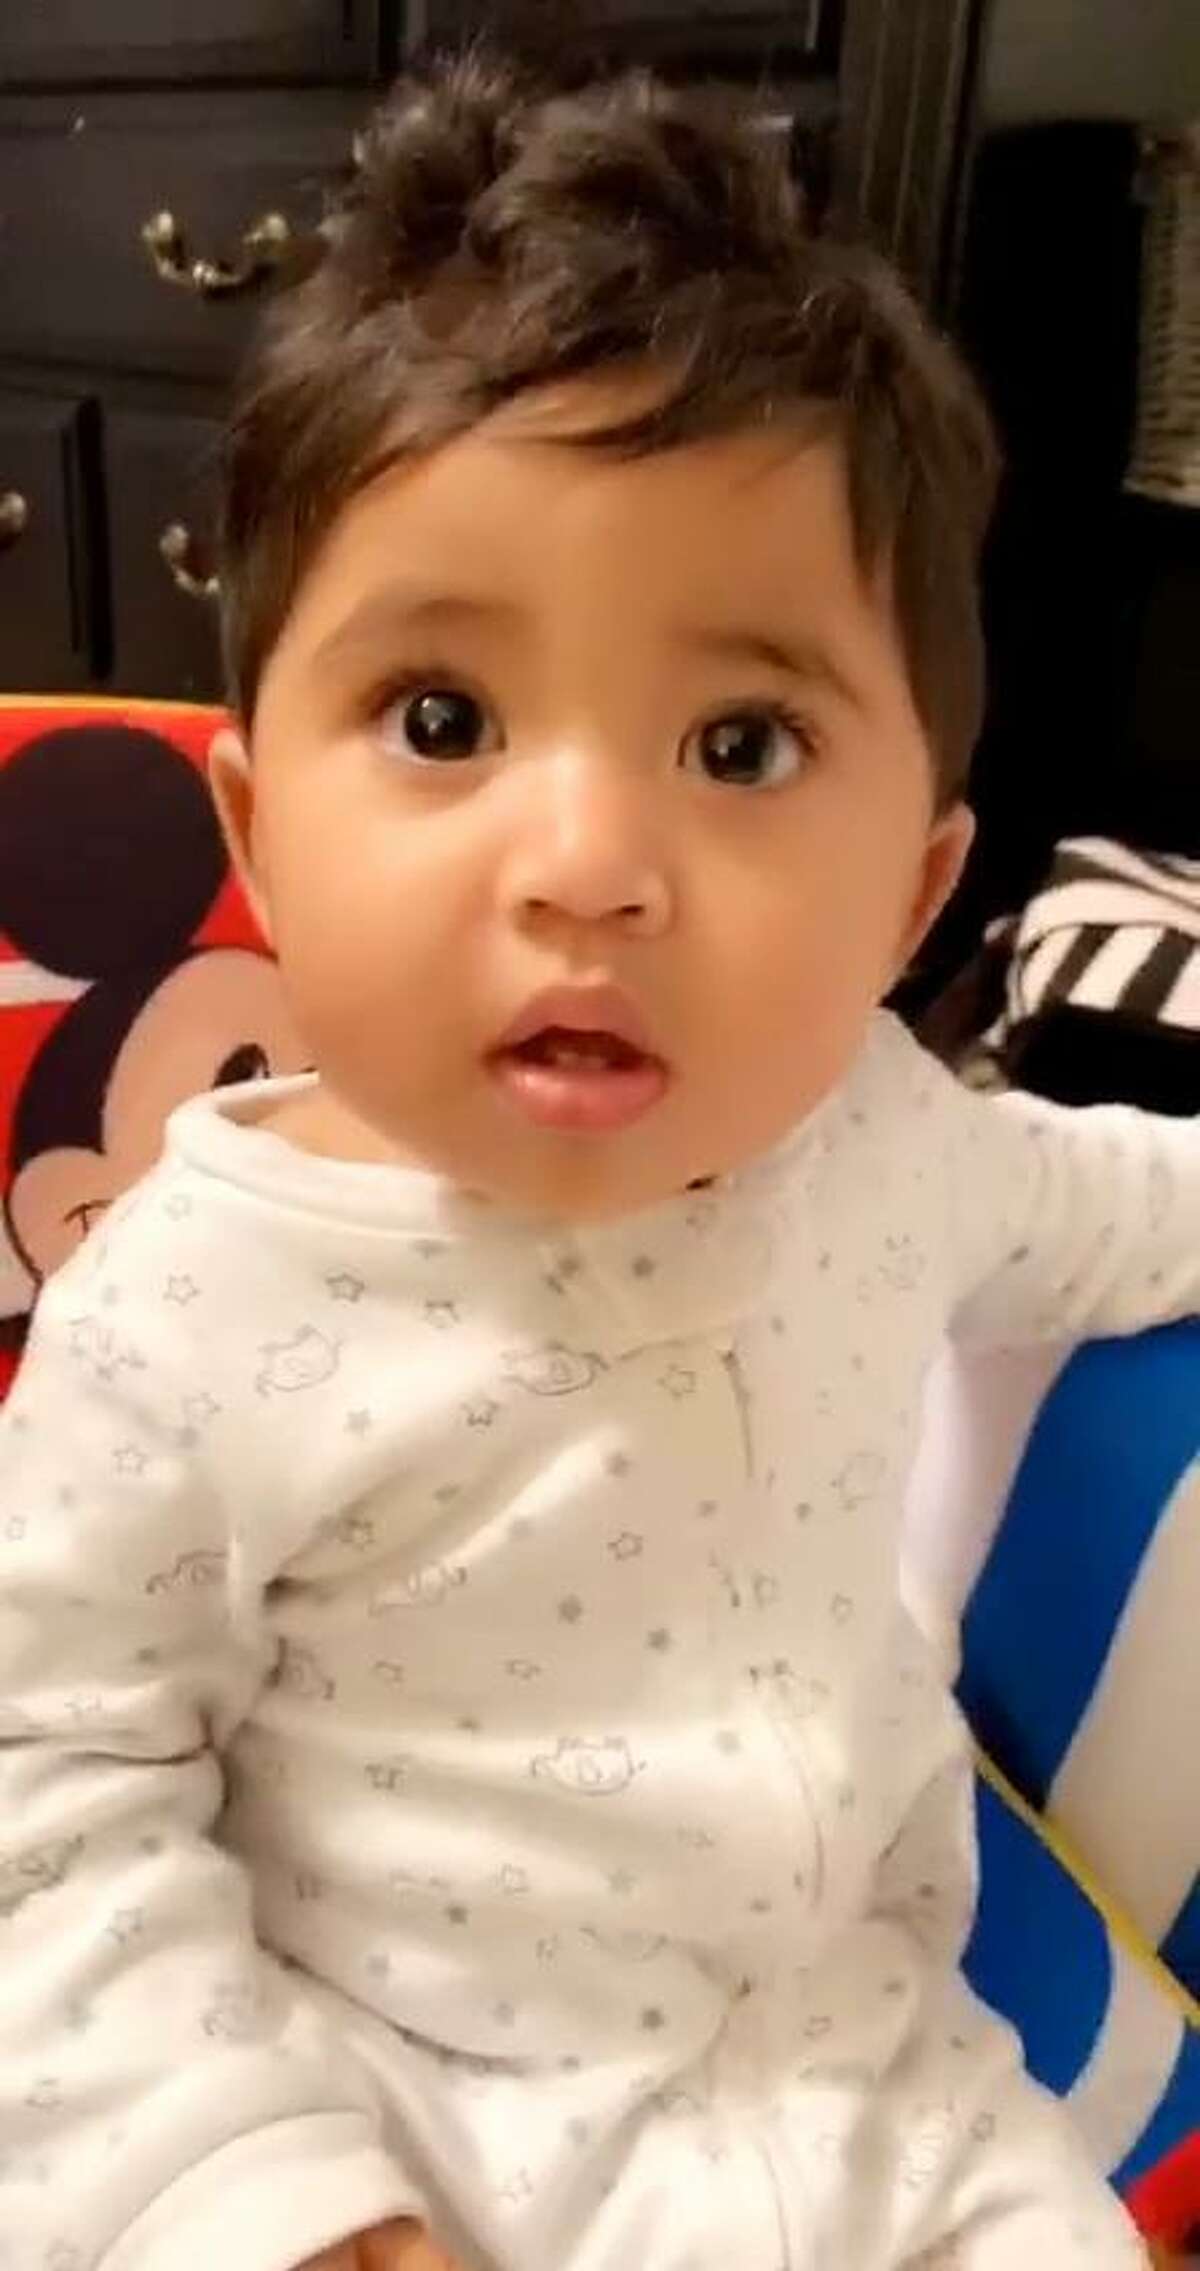 Nick Torres, 10 months, was found unconscious and unresponsive in a bathtub and later declared brain dead by Texas Children?’s Hospital doctors. After a legal fight over whether the hospital is obligated to provide treatment to keep the boy?’s heart functioning, the family plans to continue such mechanical support at home following his discharge by the hospital Monday.